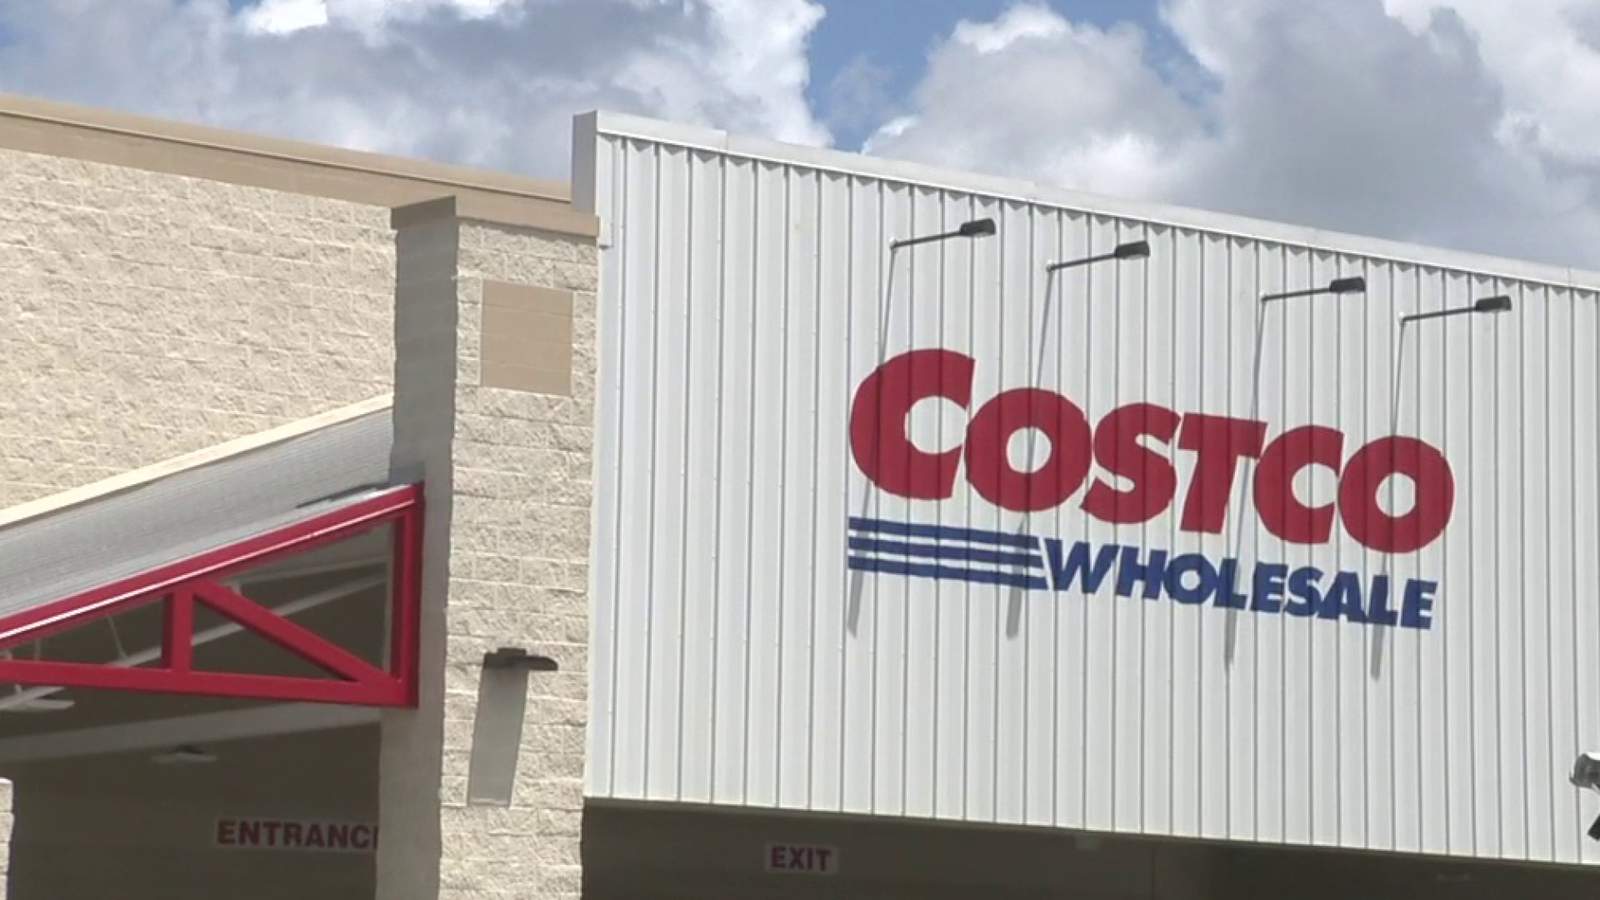 San Antonio police still searching for getaway driver involved in Costco jewelry armed robbery